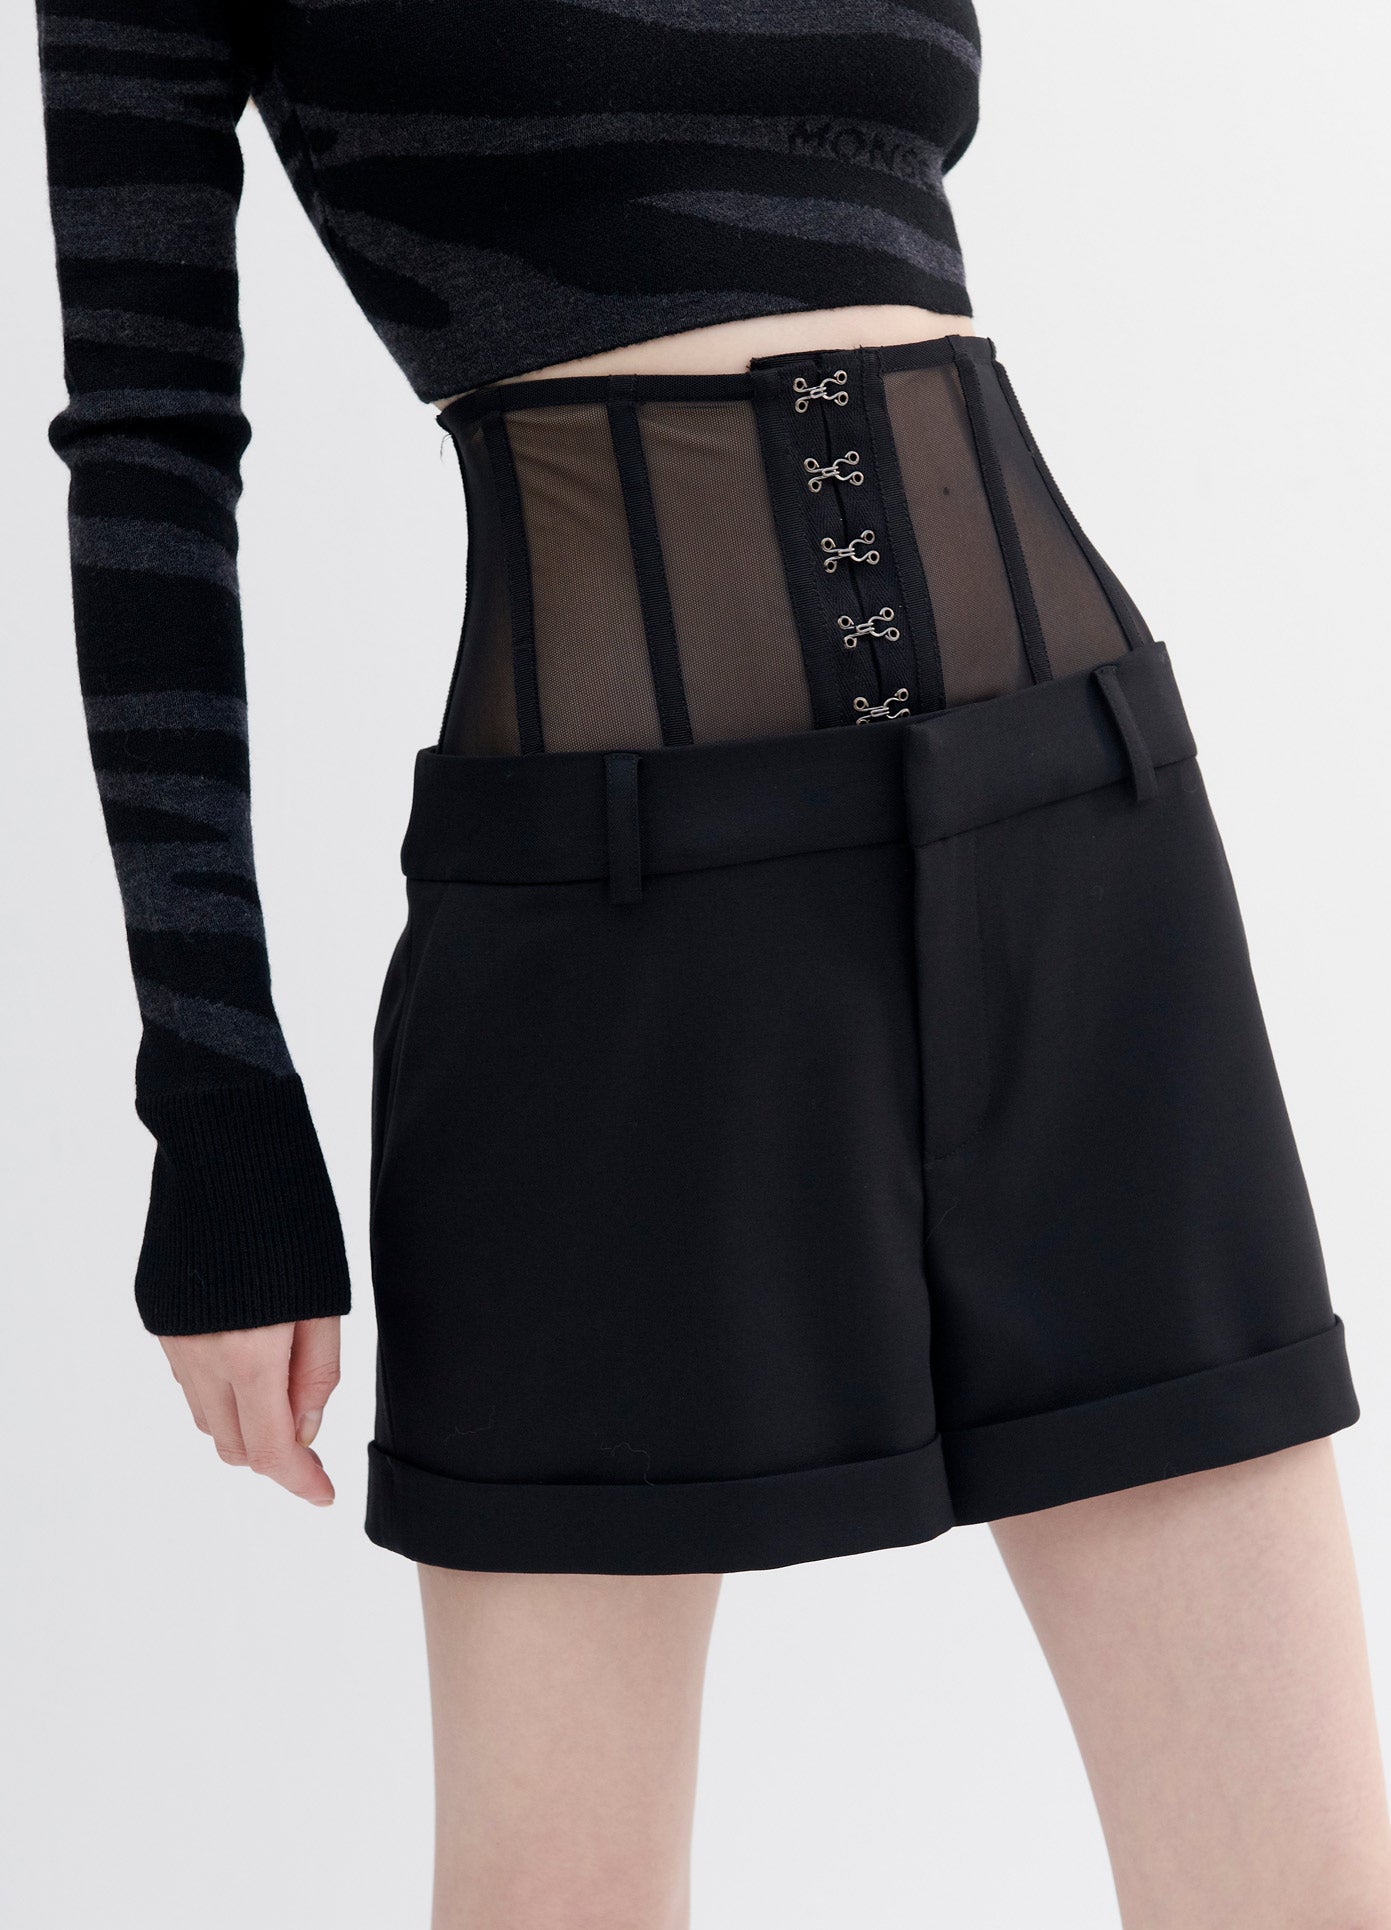 MONSE Bustier Shorts in Black on Model Front Detail View